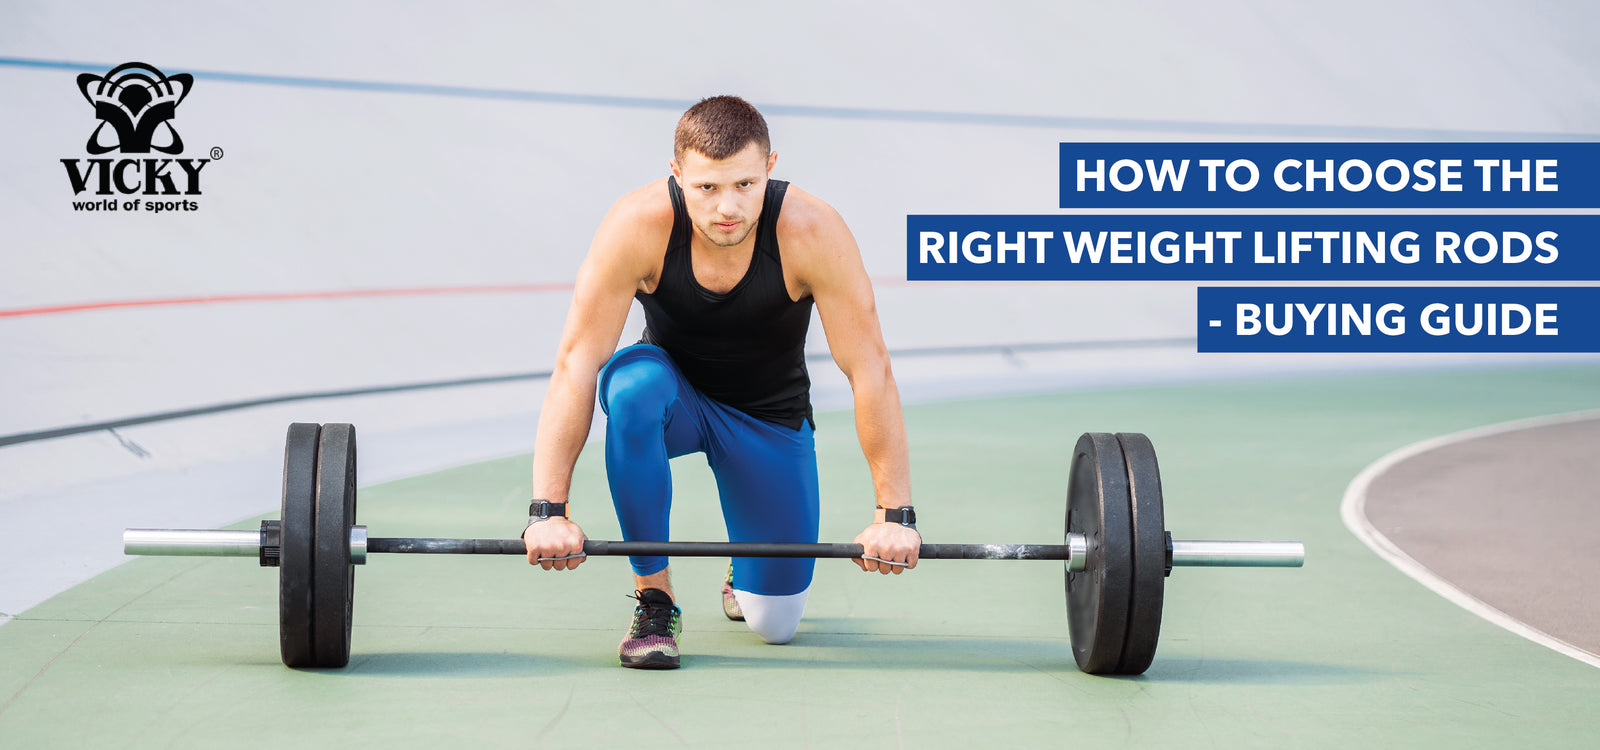 How to choose the right Weight Lifting Rods - Buying guide?